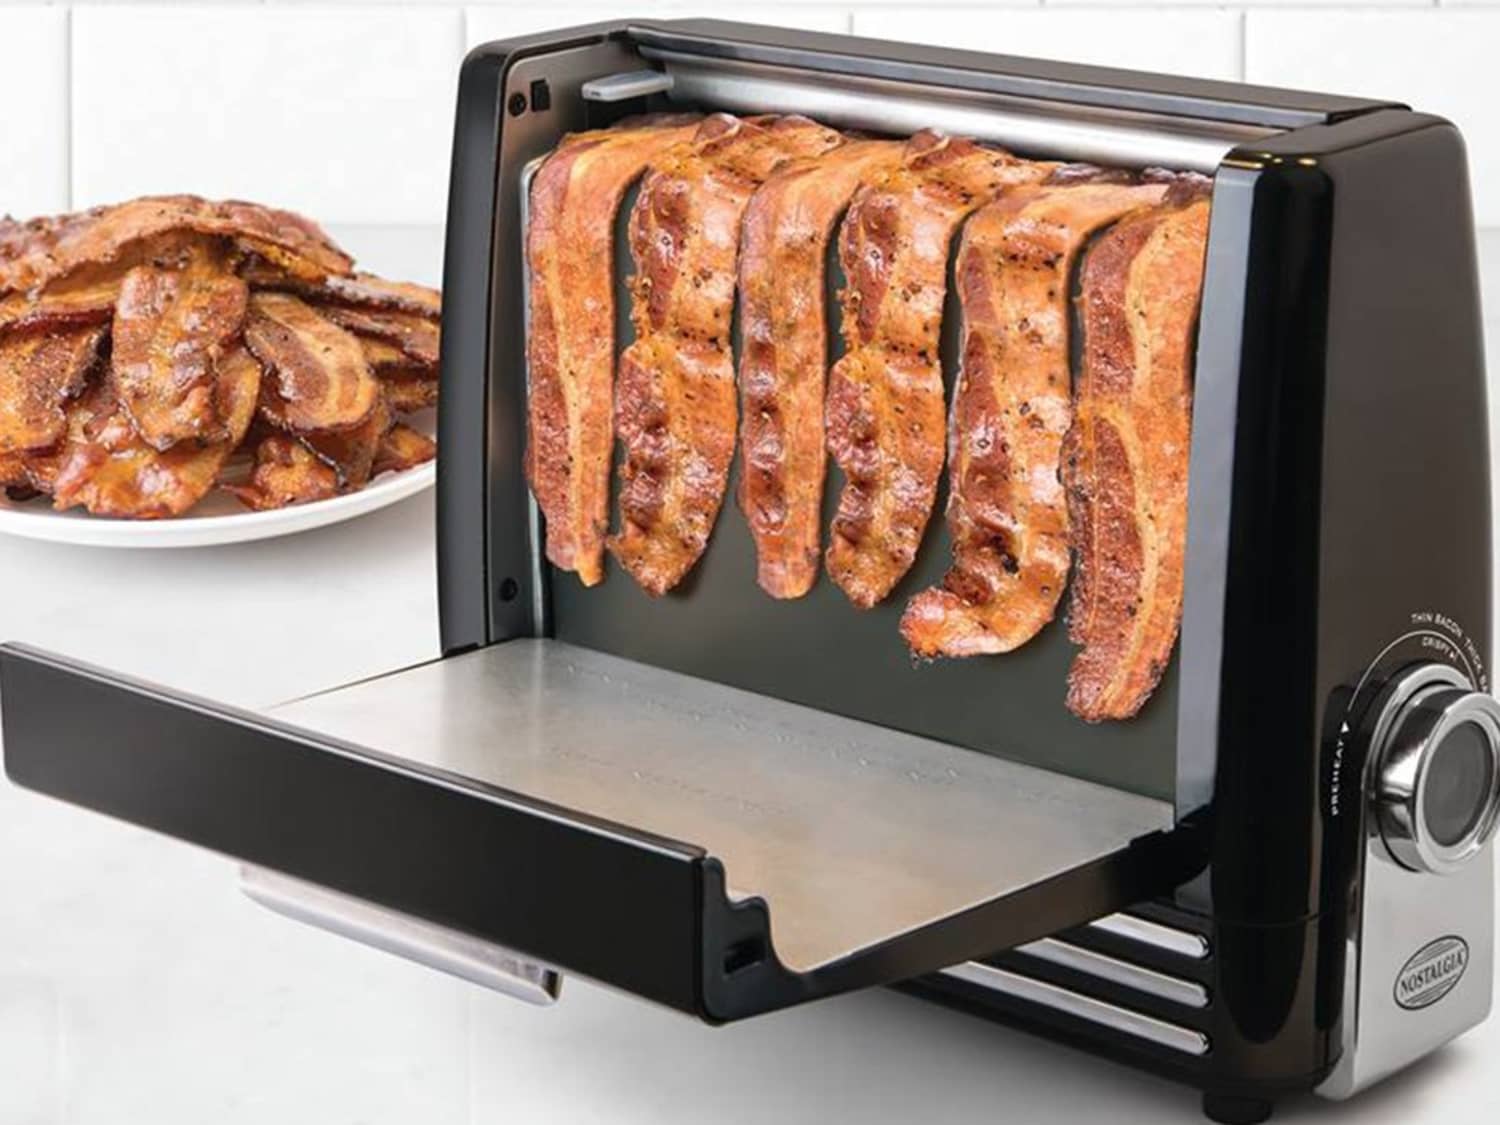 How to Cook Bacon in a Toaster Oven